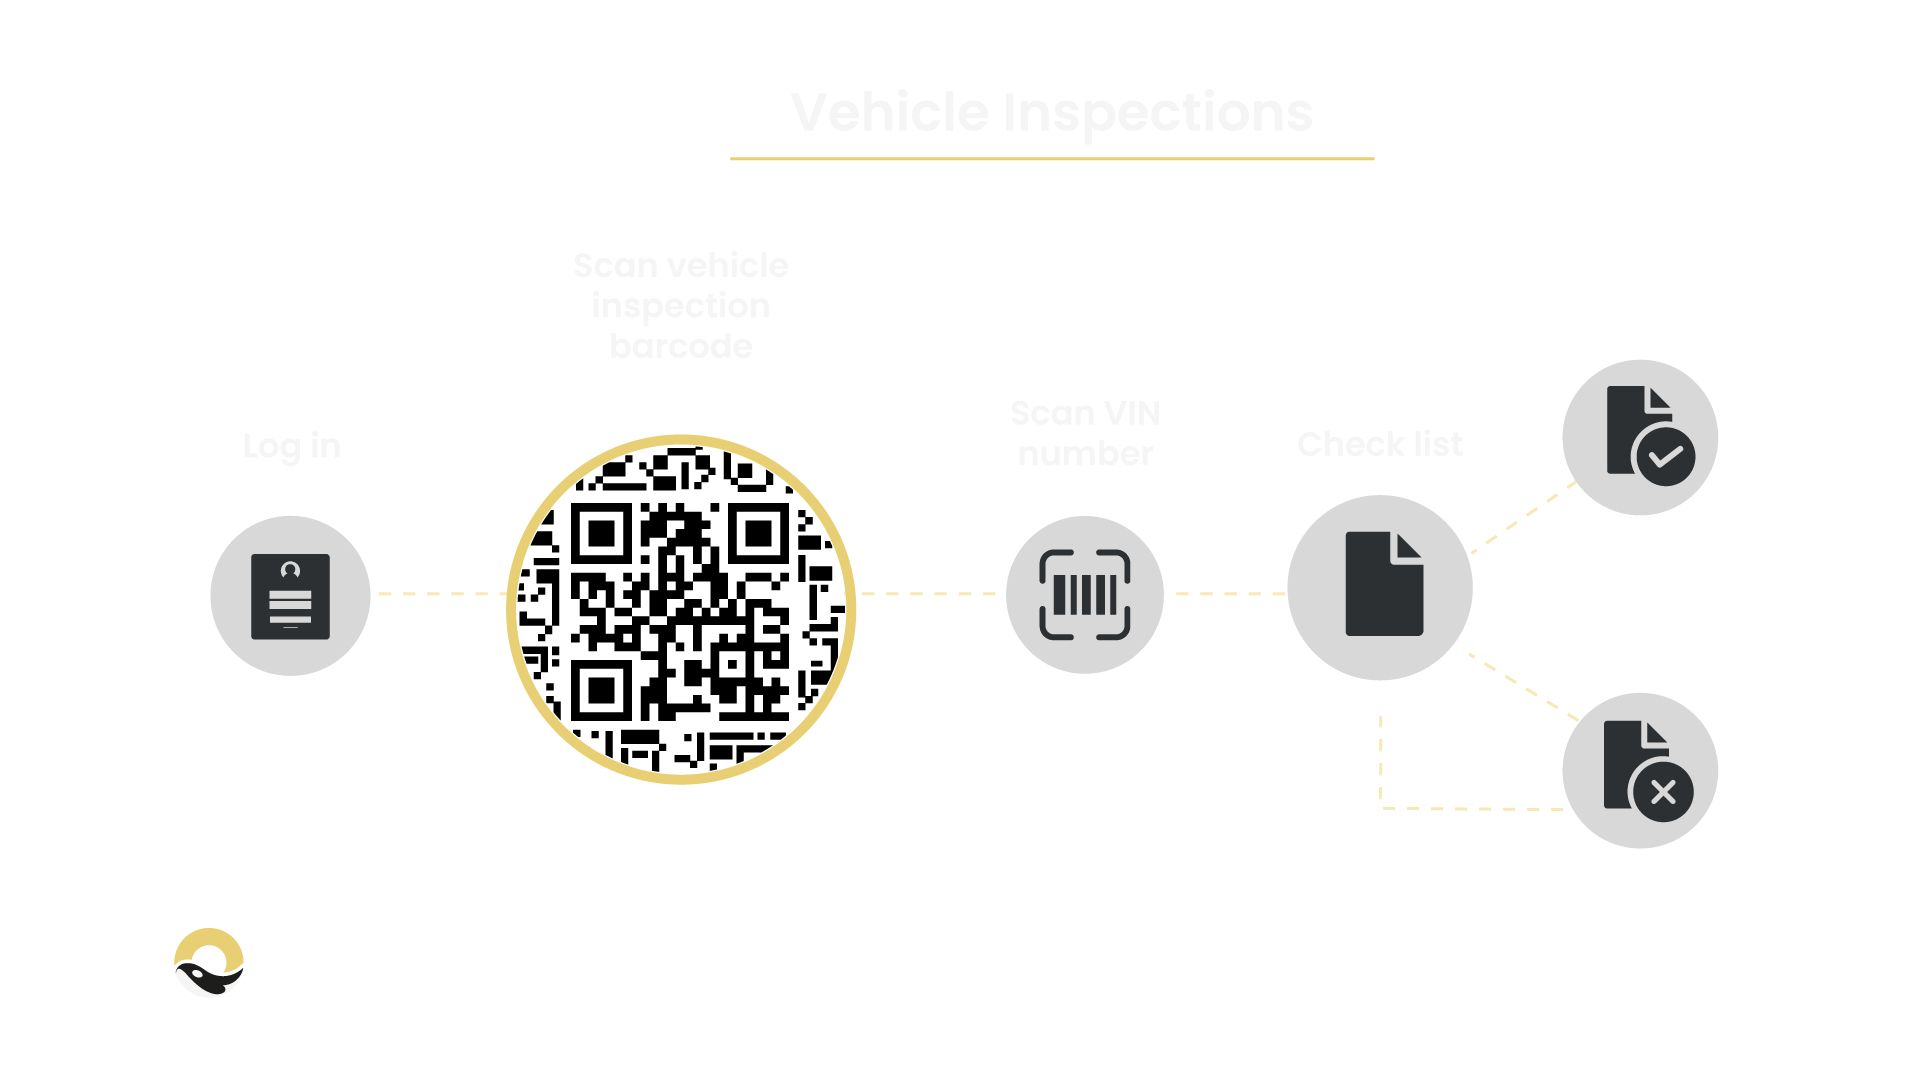 A typical workflow of a Vehicle inspection using Orca Scan.